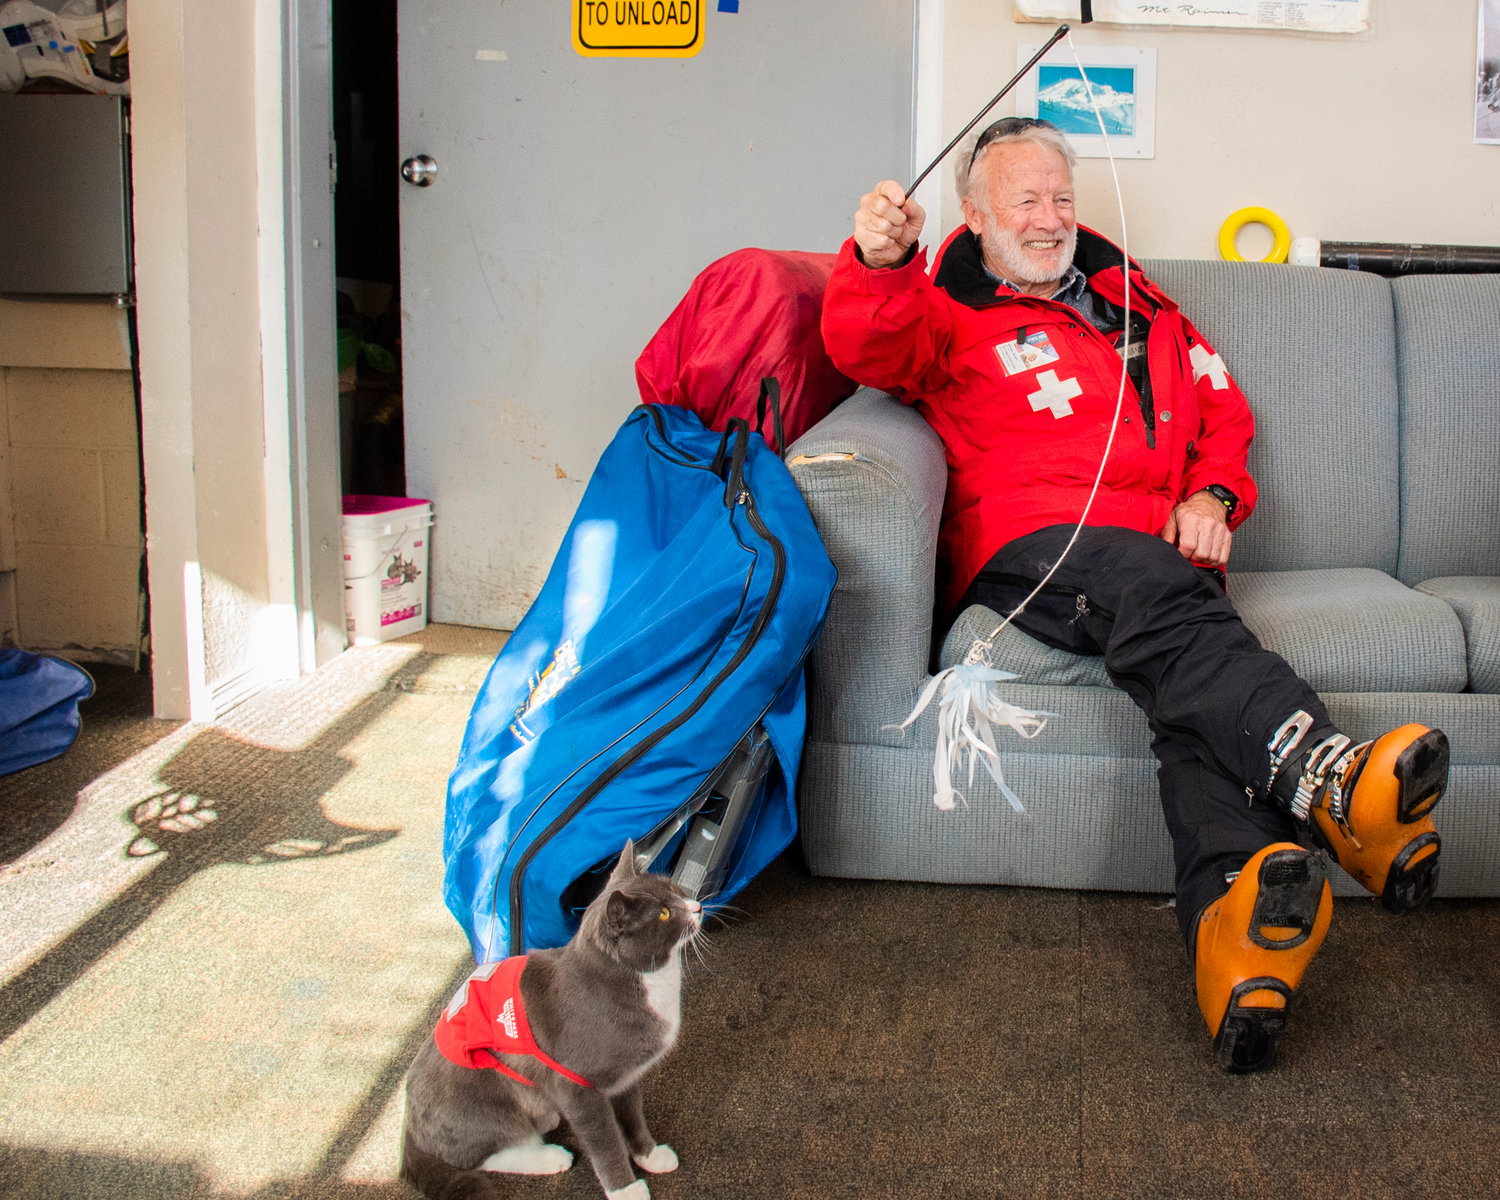 Michael “Murph” Murphy smiles while holding a cat toy as Uzi looks on inside patrol dispatch at the top of the Great White Express chairlift on Sunday.